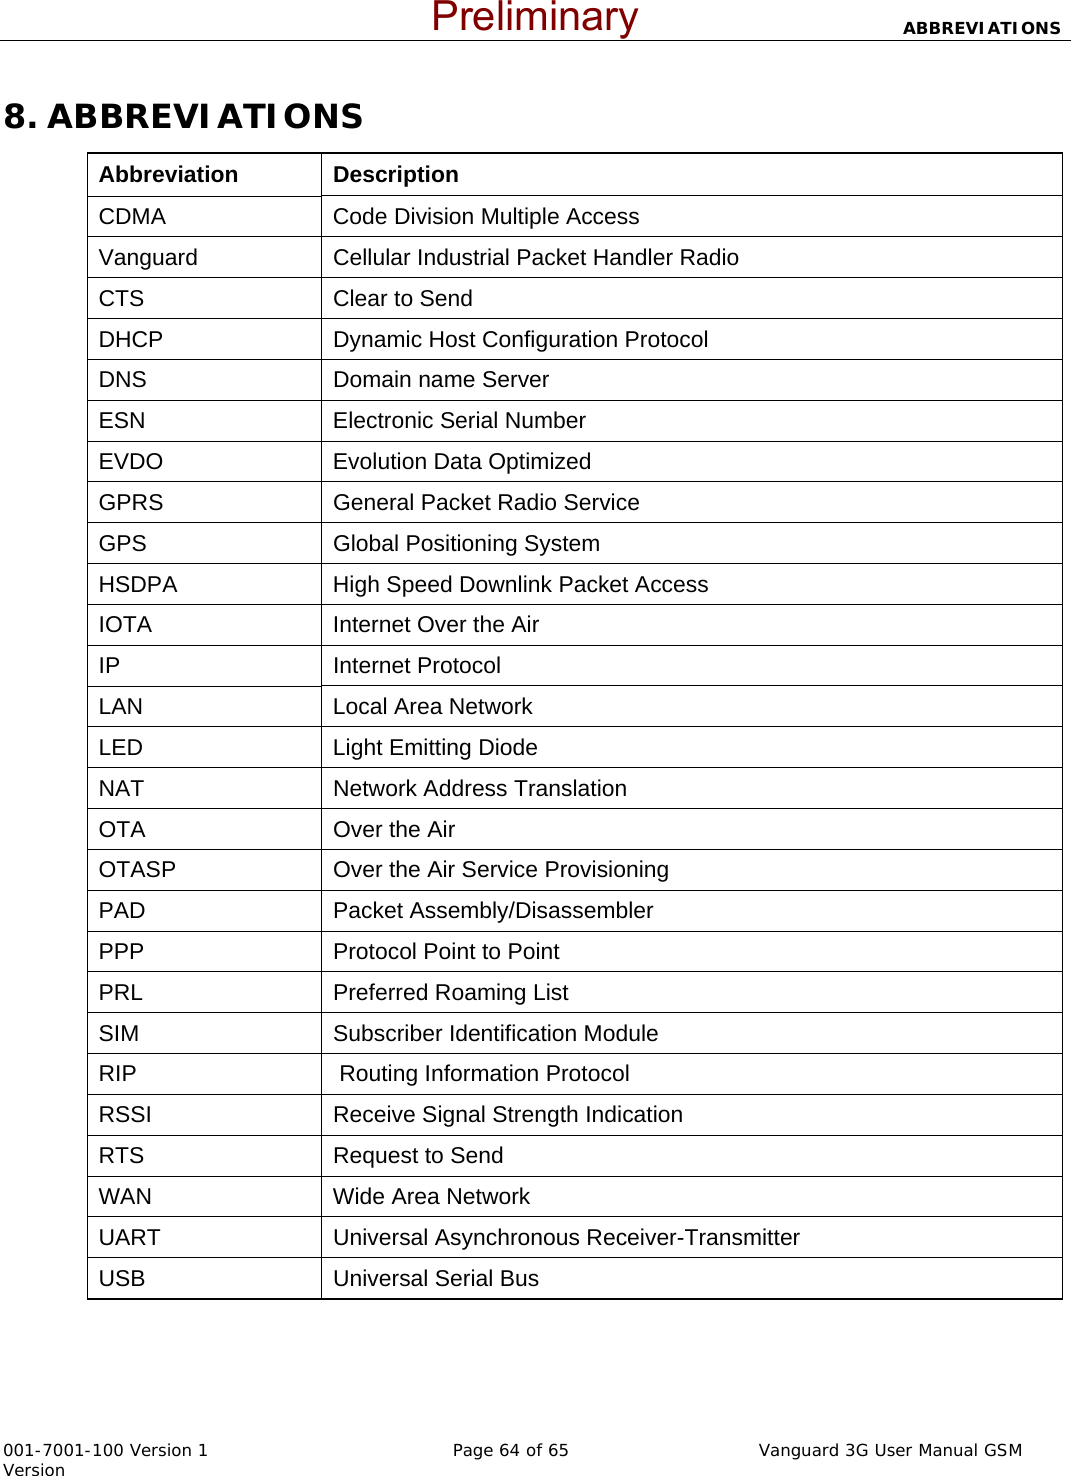                            ABBREVIATIONS  001-7001-100 Version 1       Page 64 of 65       Vanguard 3G User Manual GSM Version 8. ABBREVIATIONS Abbreviation  Description  CDMA  Code Division Multiple Access Vanguard  Cellular Industrial Packet Handler Radio CTS   Clear to Send  DHCP  Dynamic Host Configuration Protocol DNS  Domain name Server ESN  Electronic Serial Number EVDO  Evolution Data Optimized GPRS   General Packet Radio Service  GPS  Global Positioning System HSDPA  High Speed Downlink Packet Access IOTA  Internet Over the Air IP   Internet Protocol  LAN Local Area Network LED  Light Emitting Diode NAT  Network Address Translation OTA  Over the Air OTASP  Over the Air Service Provisioning PAD Packet Assembly/Disassembler PPP  Protocol Point to Point PRL  Preferred Roaming List SIM   Subscriber Identification Module  RIP   Routing Information Protocol RSSI  Receive Signal Strength Indication RTS   Request to Send  WAN  Wide Area Network UART   Universal Asynchronous Receiver-Transmitter  USB   Universal Serial Bus  Preliminary